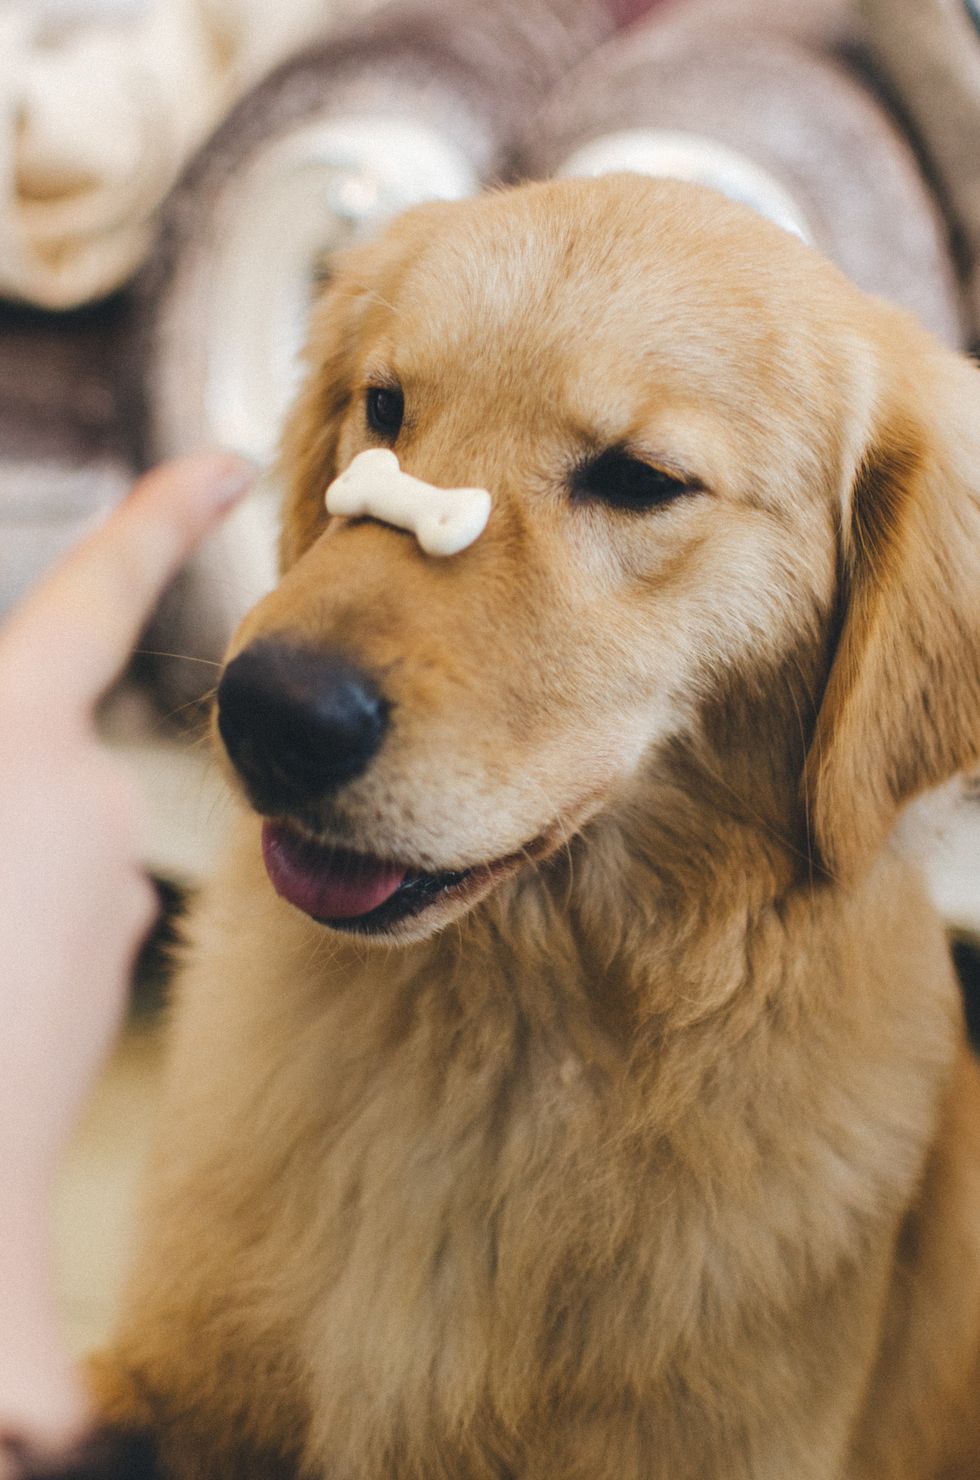 Golden Retriever sitting with a dog treat on nose